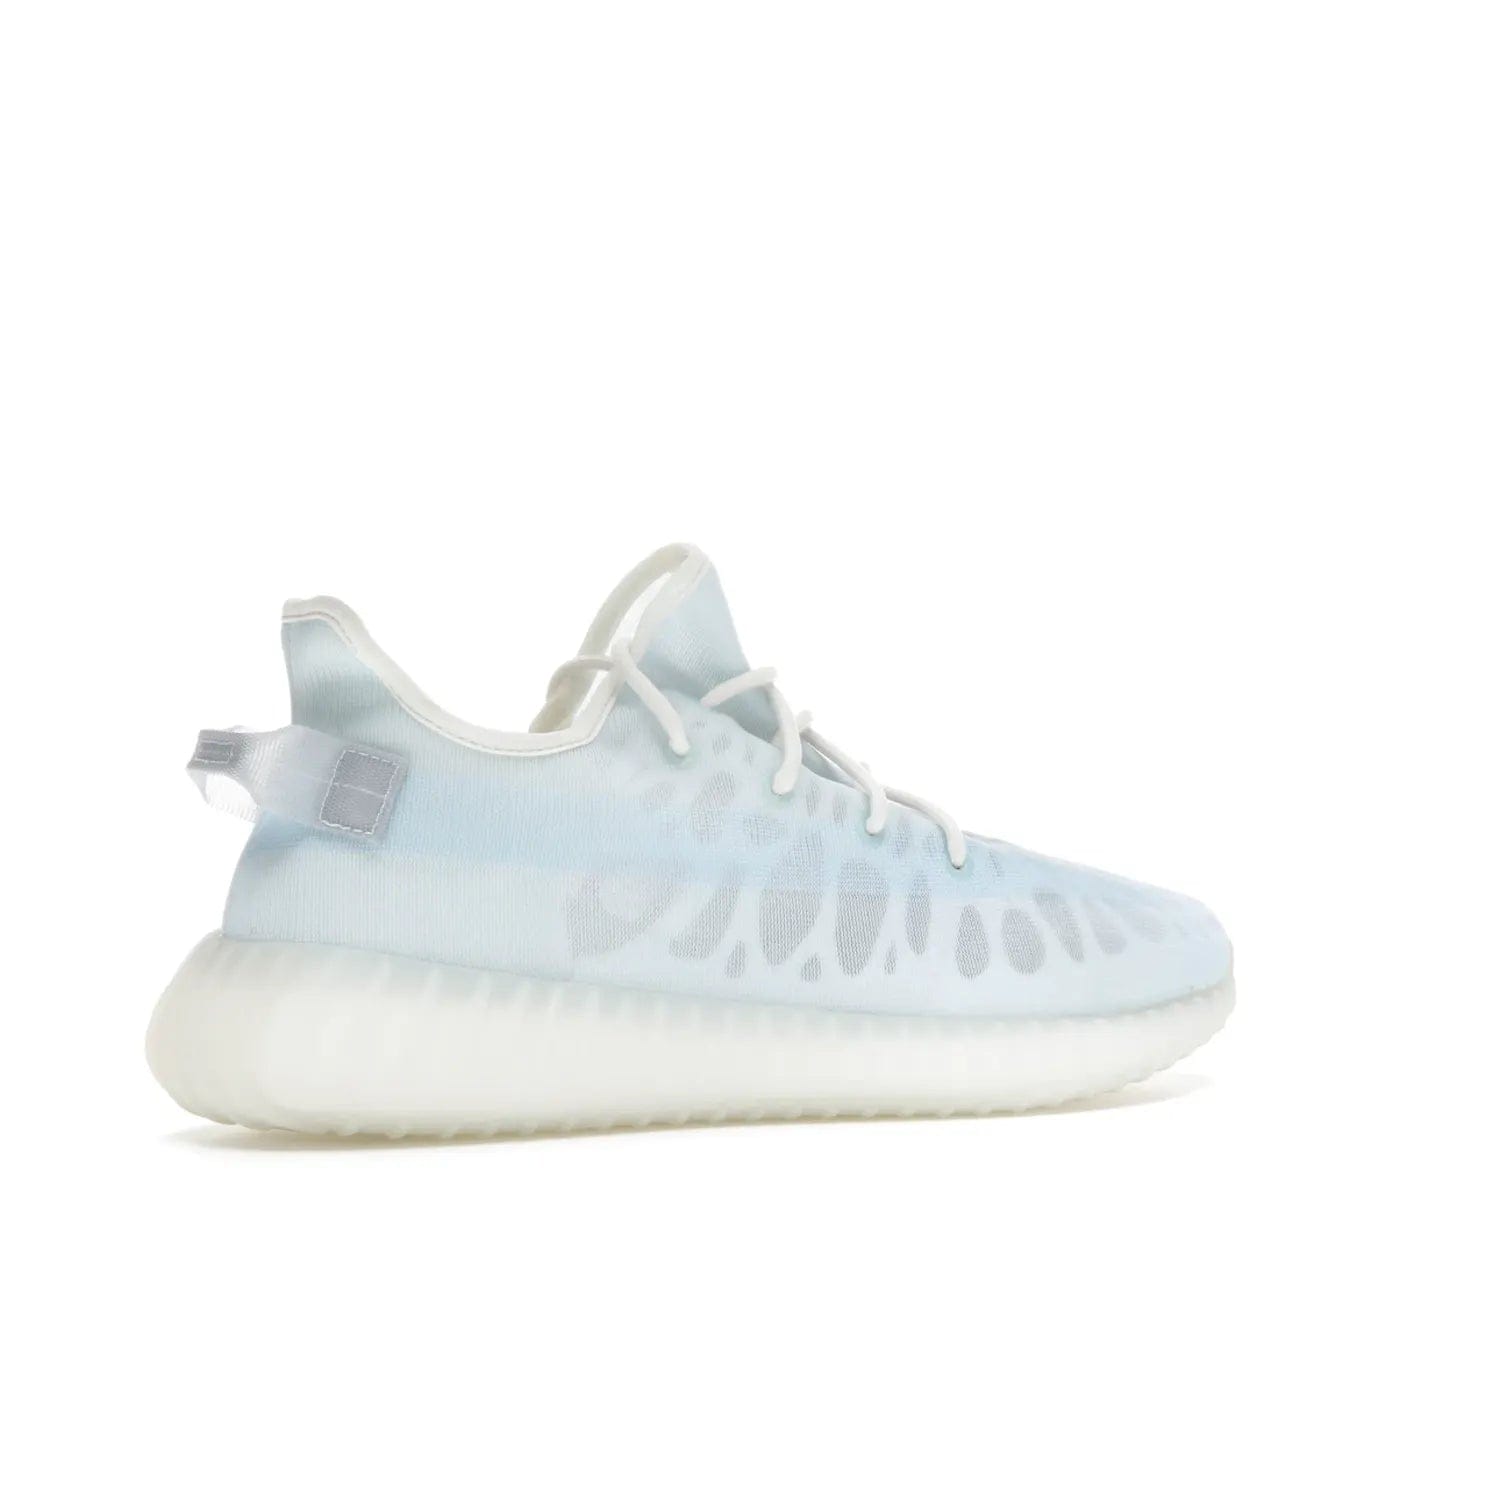 adidas Yeezy Boost 350 V2 Mono Ice - Image 34 - Only at www.BallersClubKickz.com - Introducing the adidas Yeezy 350 V2 Mono Ice - a sleek monofilament mesh design in Ice blue with Boost sole and heel pull tab. Released exclusively in the US for $220.